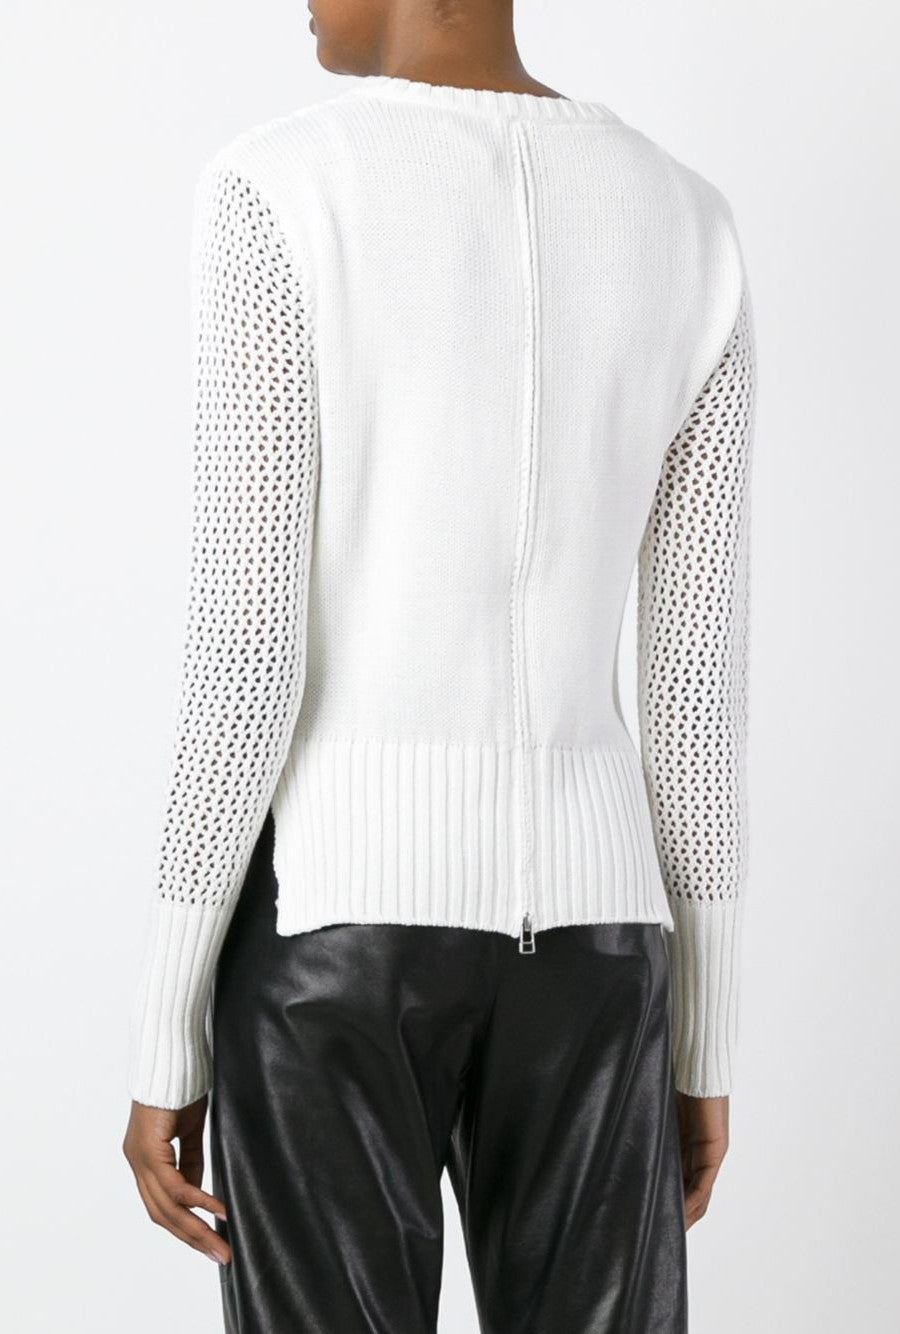 WHITE COTTON ZIP BACK MESH KNITTED SWEATER